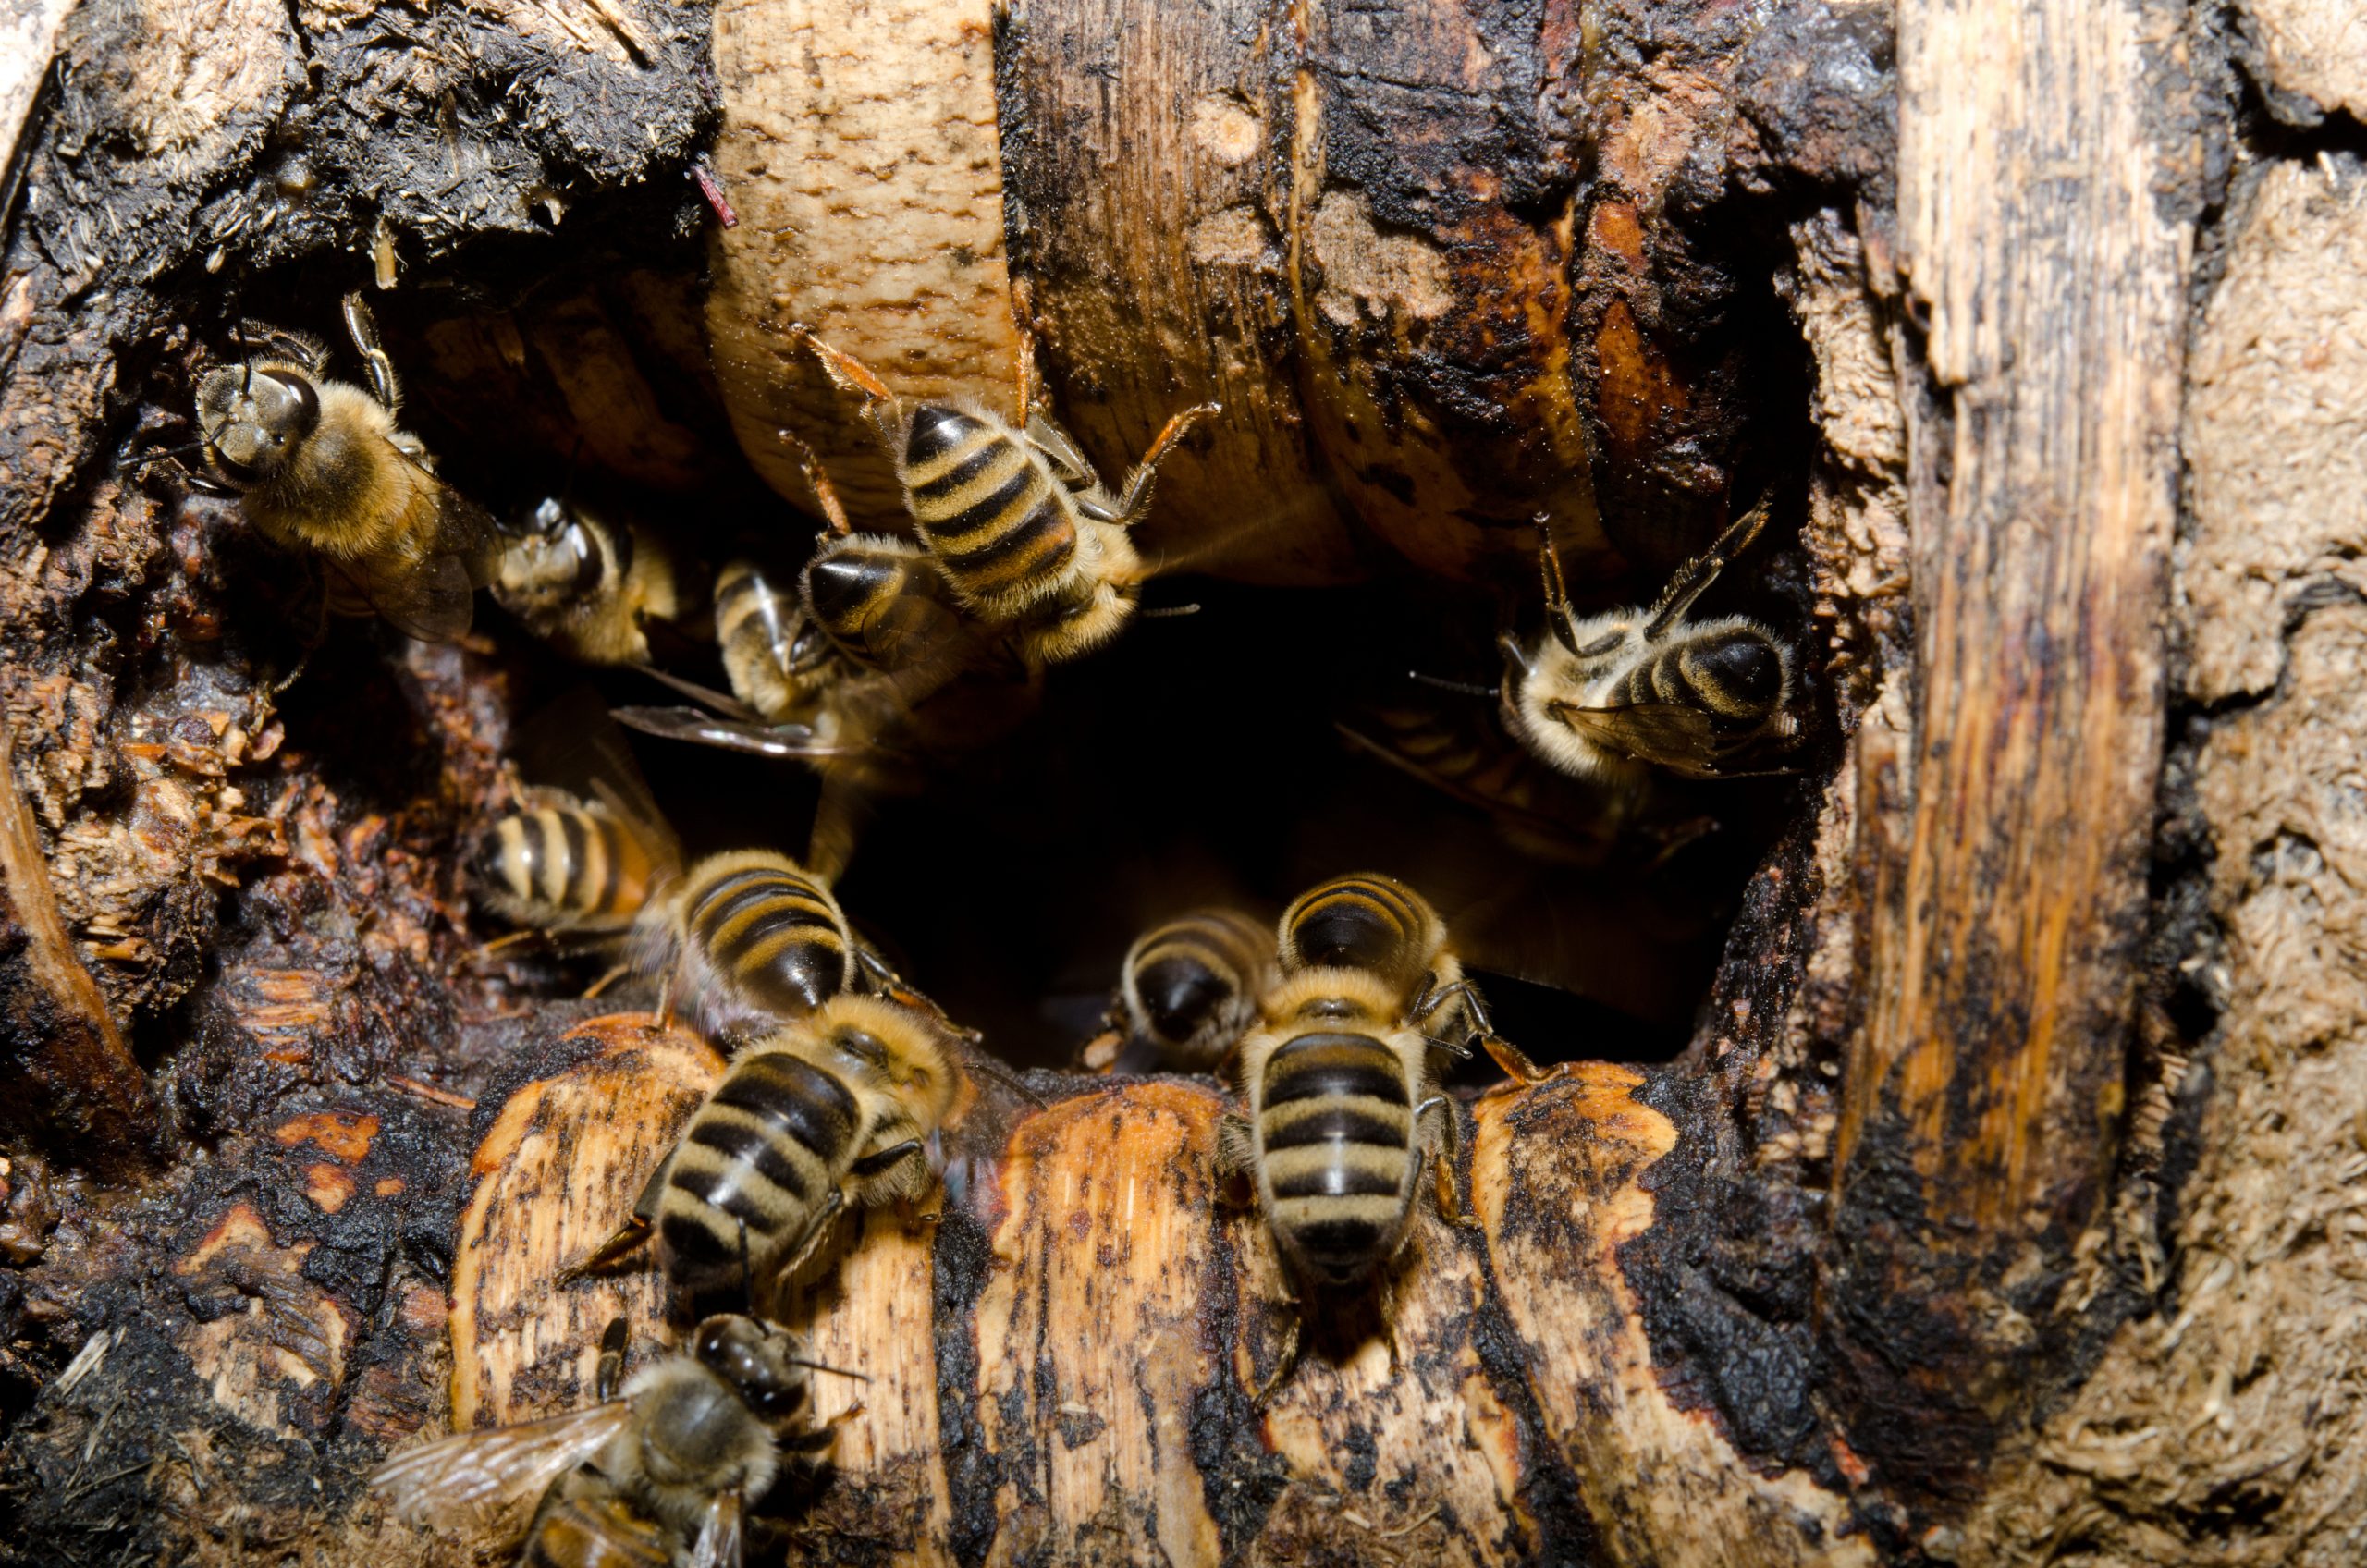 Honeybees and Humans Share Common Genes